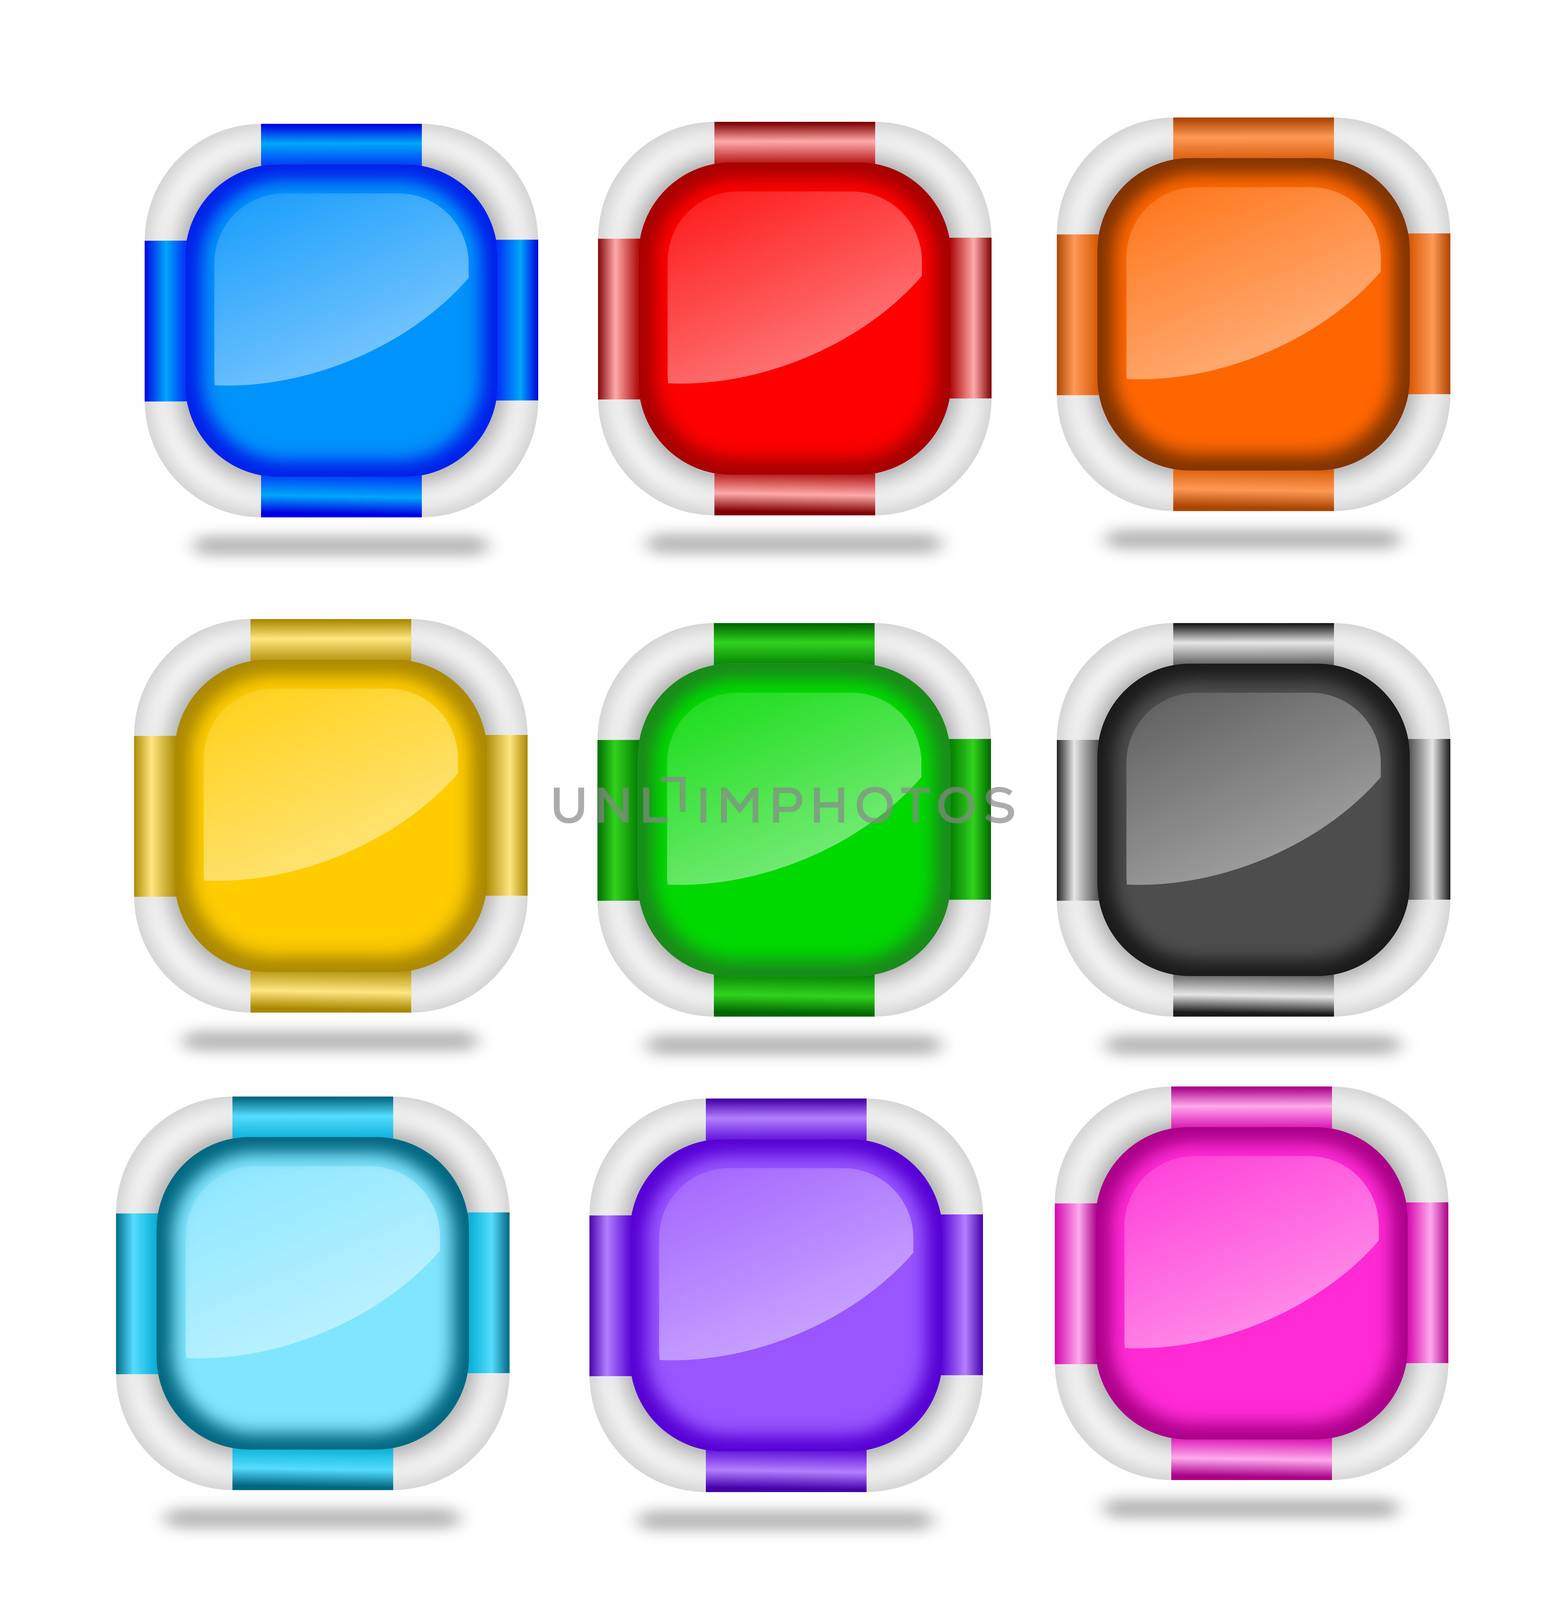 Set of blank square web icon buttons with beveled white rims in nine attractive pastel colors - blue, red brown, yellow, green, black aqua, violet and pink
